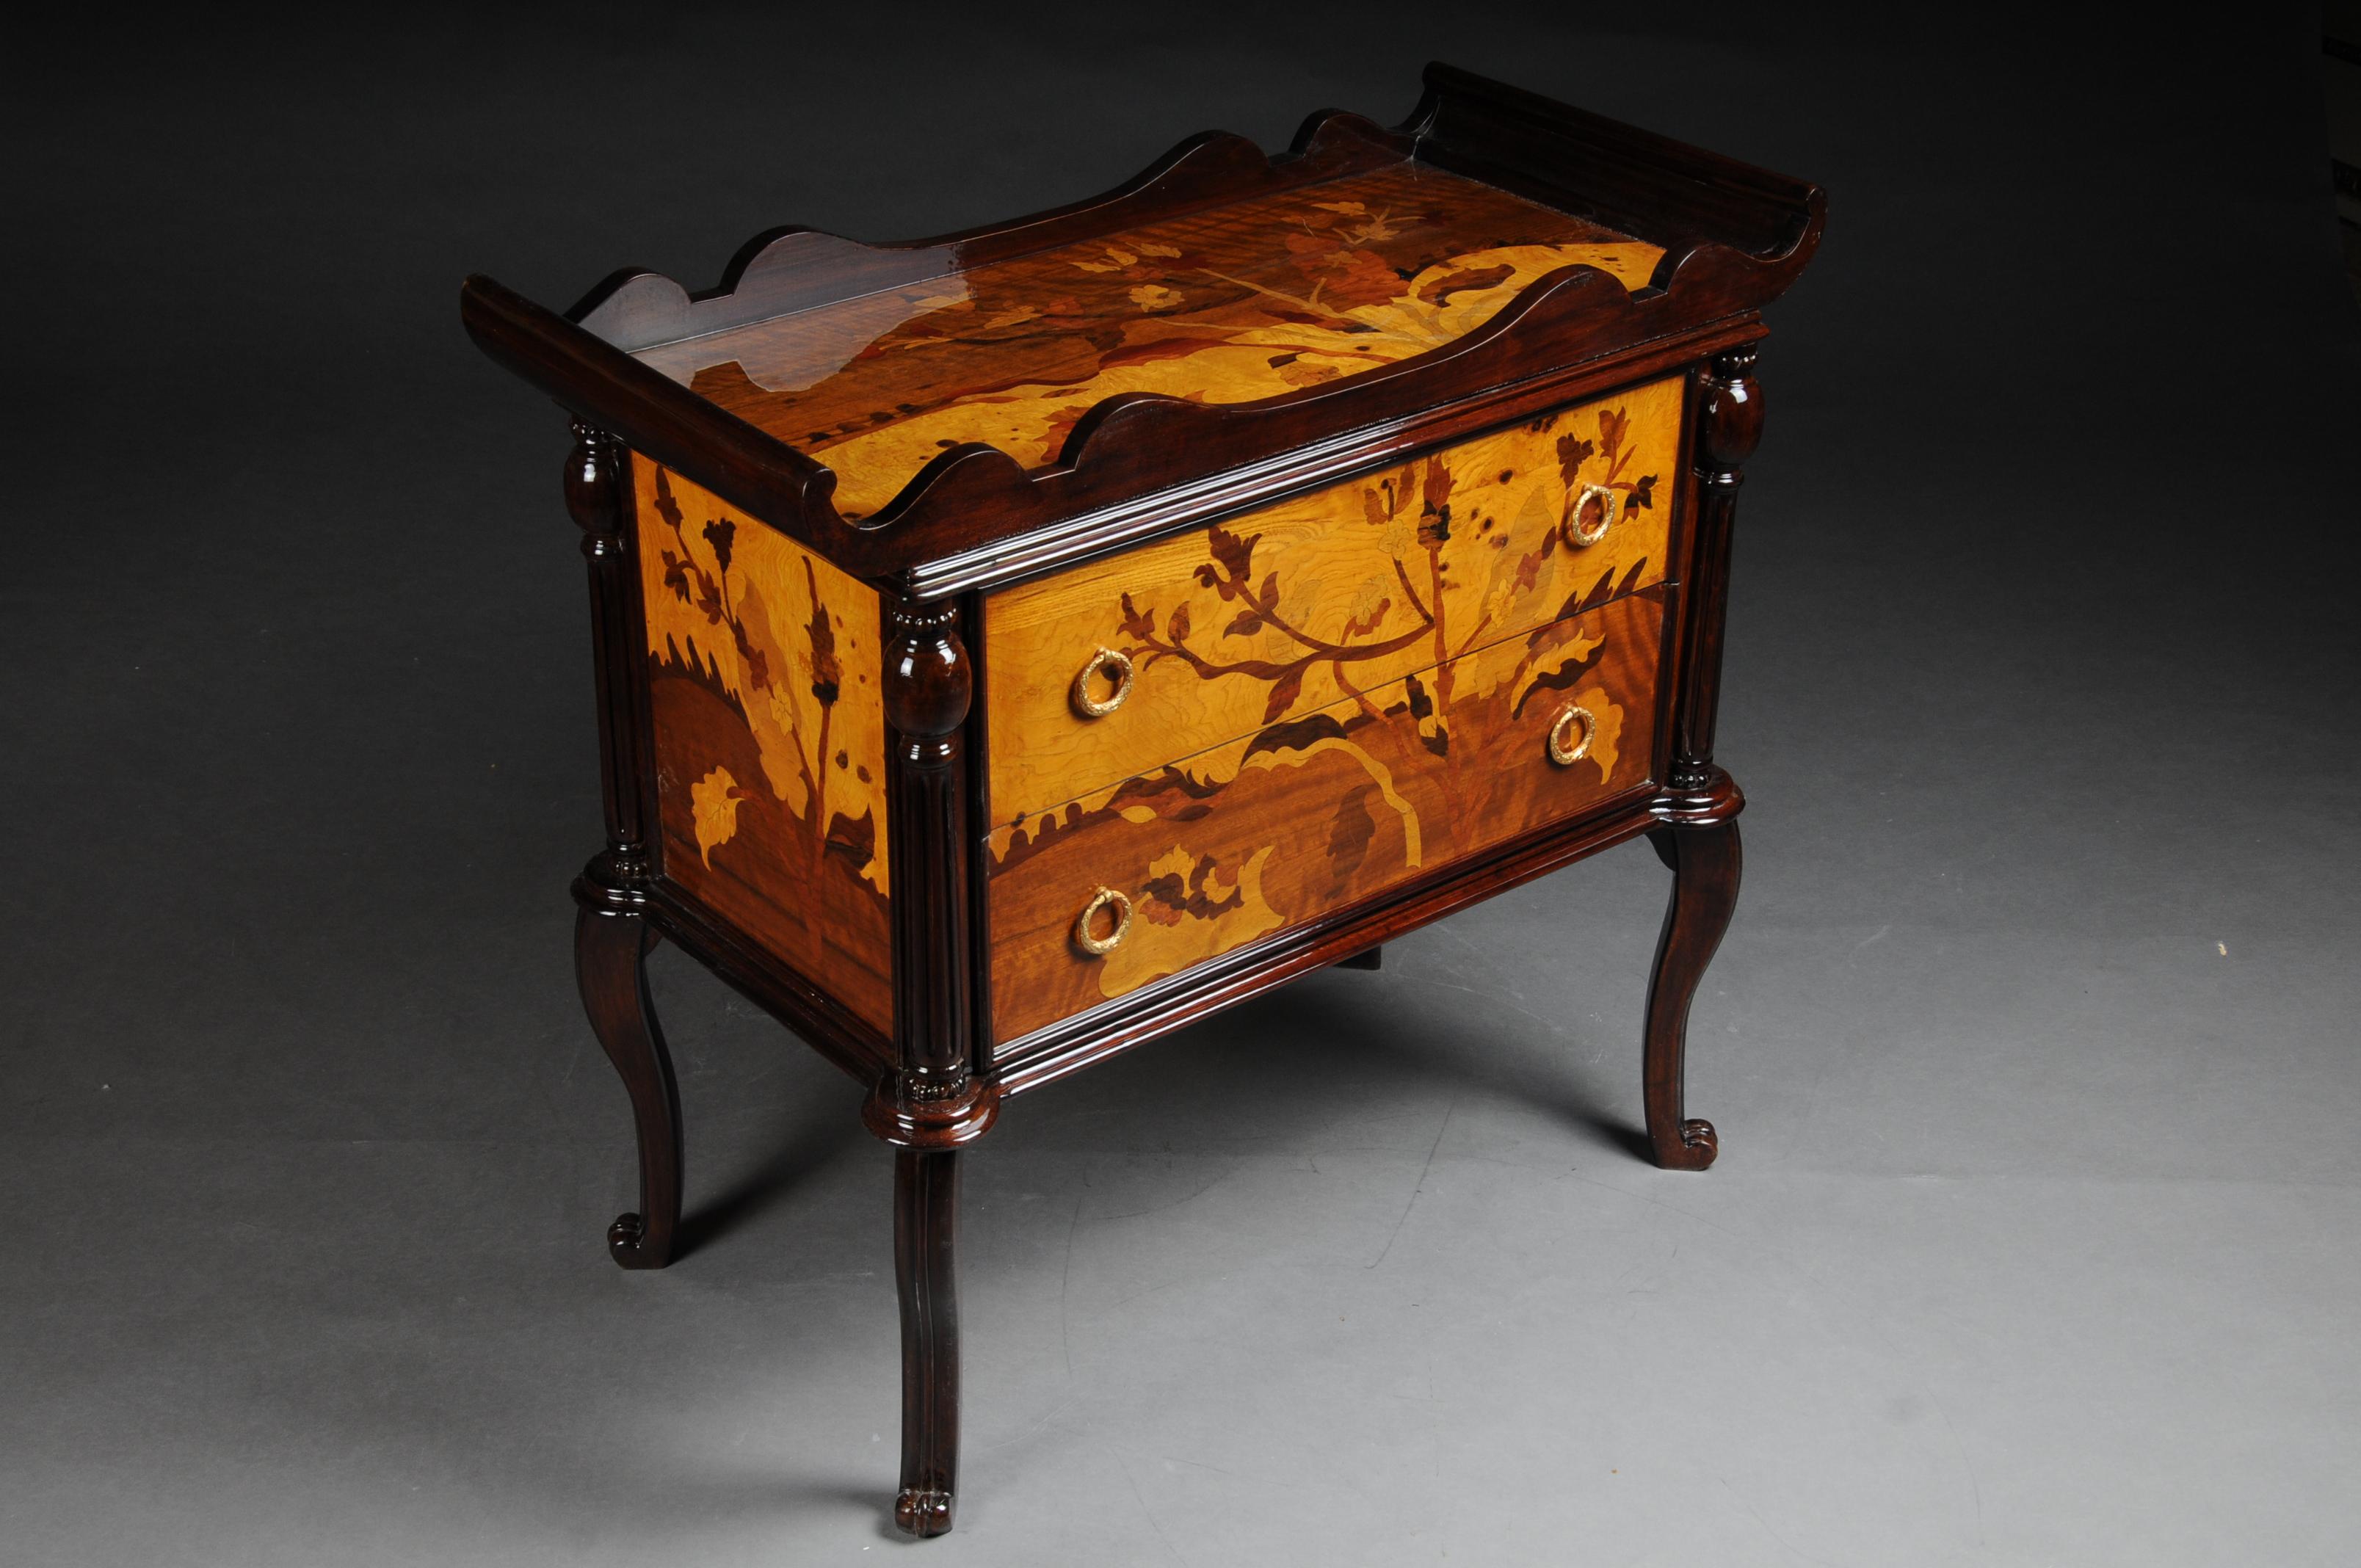 French chest of drawers with shelf Tray Art Neveau.
All-round hand-inlaid inlays with Art Nouveau motifs. Landscaped to Gallé
Solid wood with different inlaid precious veneers. Carcass case on slanted, curly legs.

(D-Gm-220).